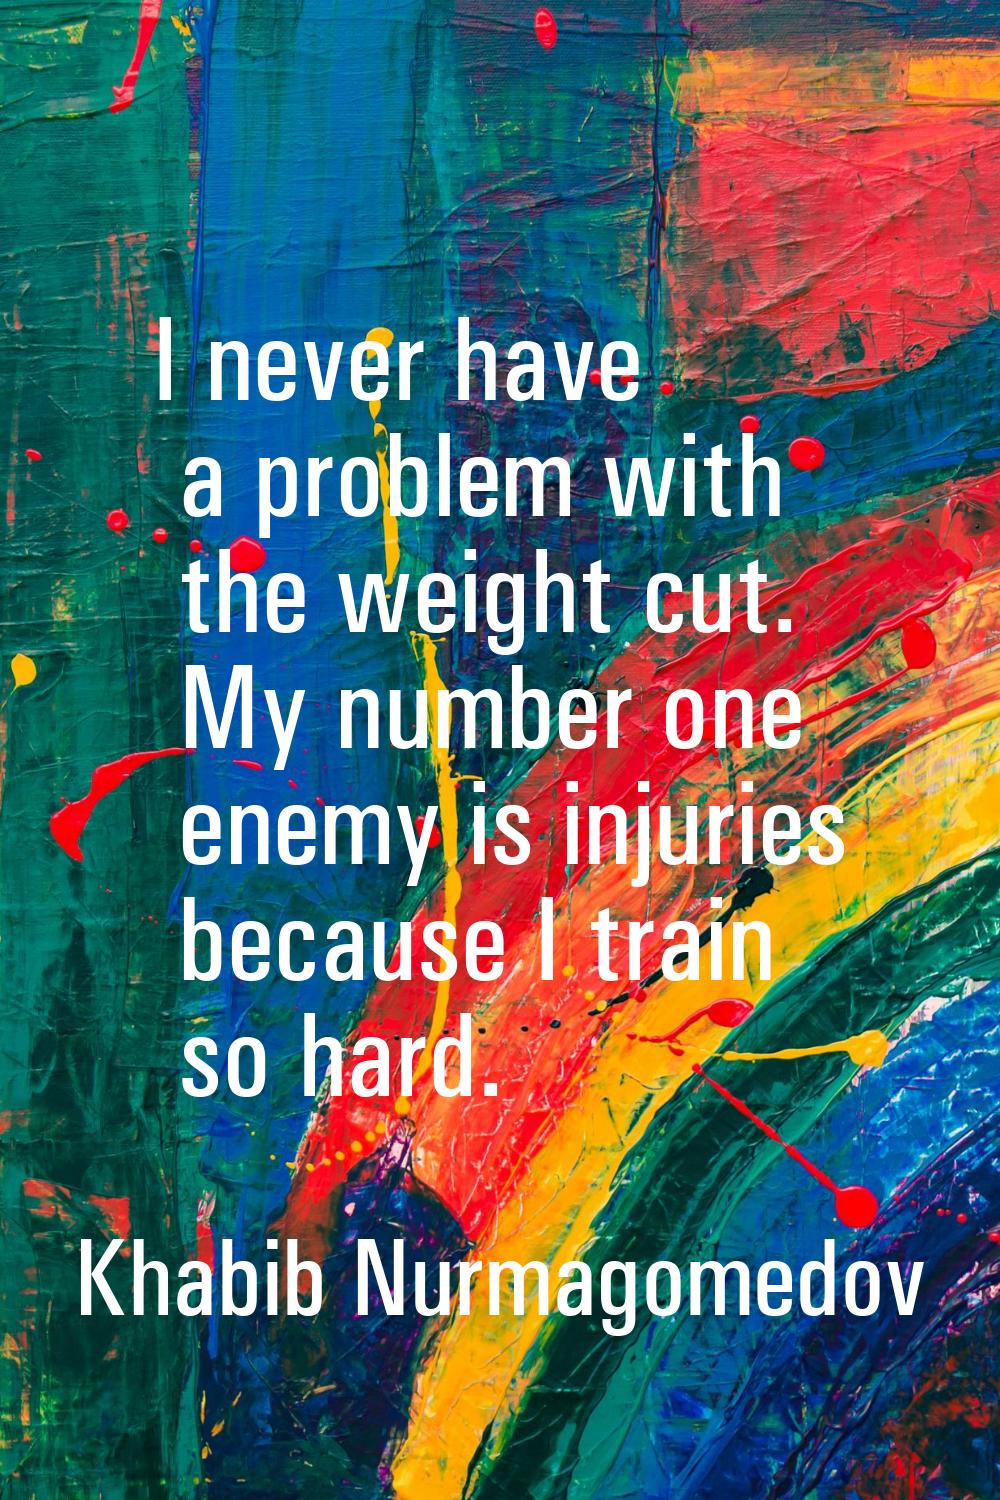 I never have a problem with the weight cut. My number one enemy is injuries because I train so hard